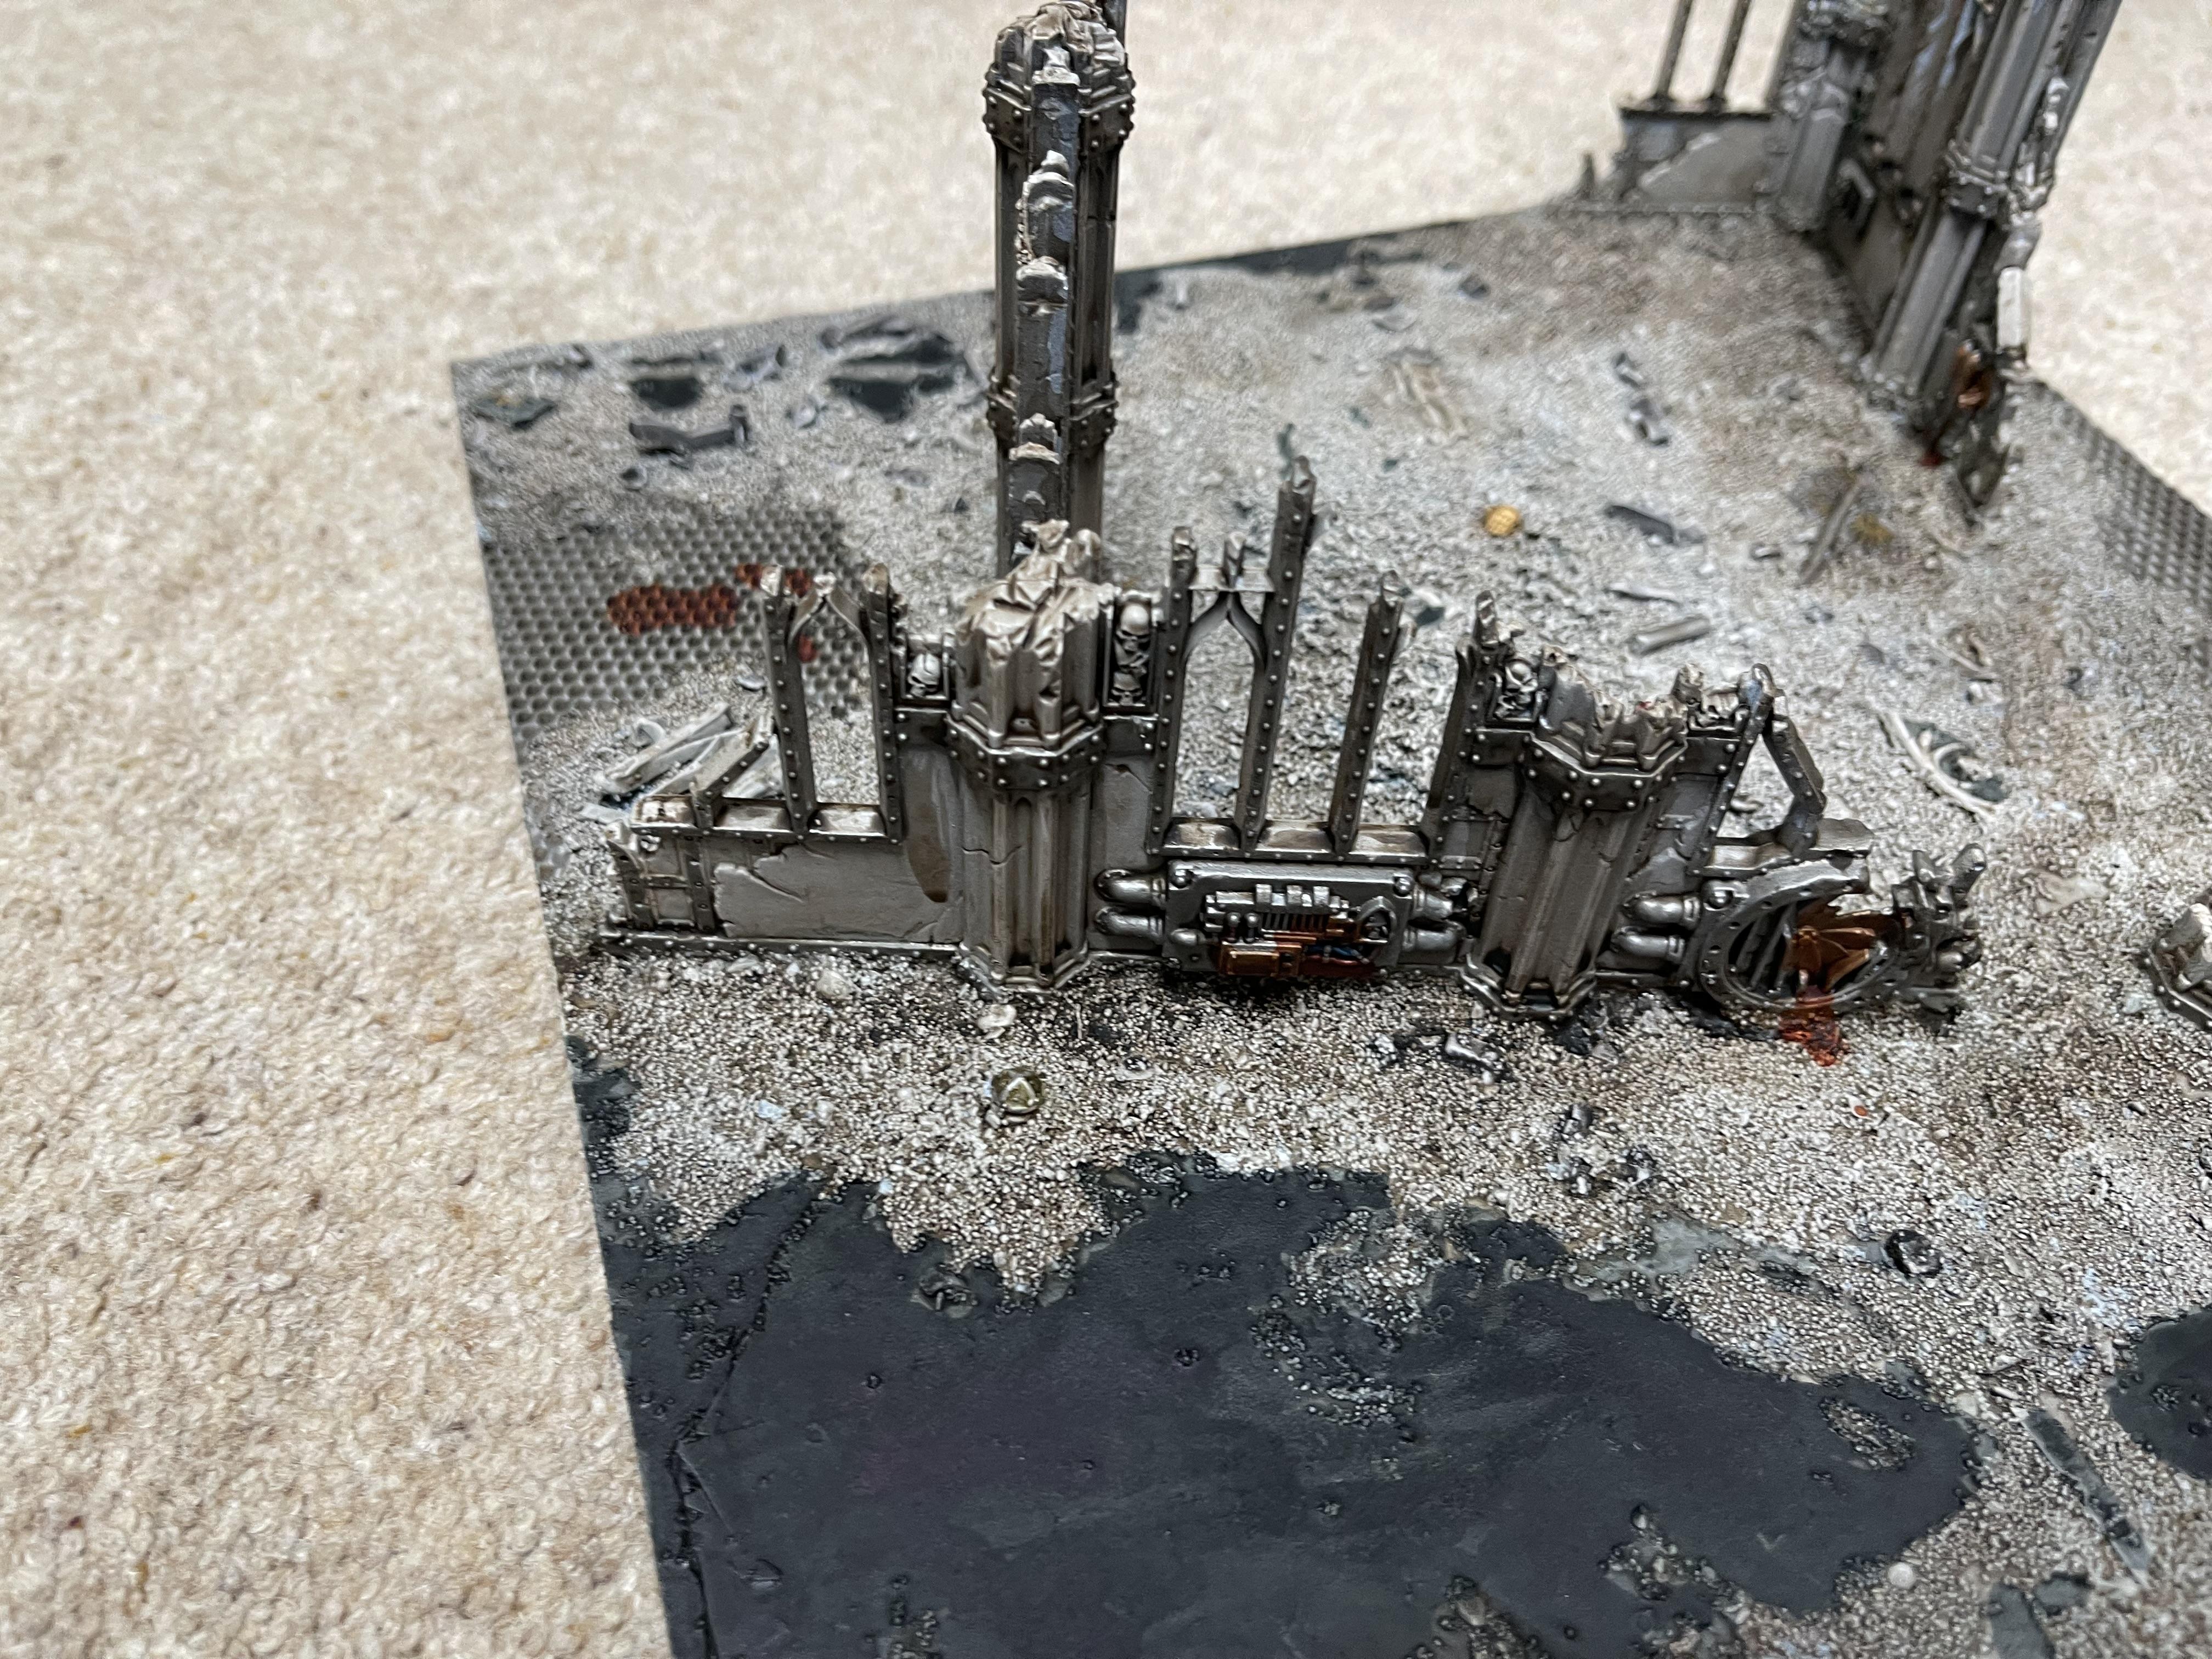 Display Board, Sector Imperialis, Void Panthers, Warhammer 40,000